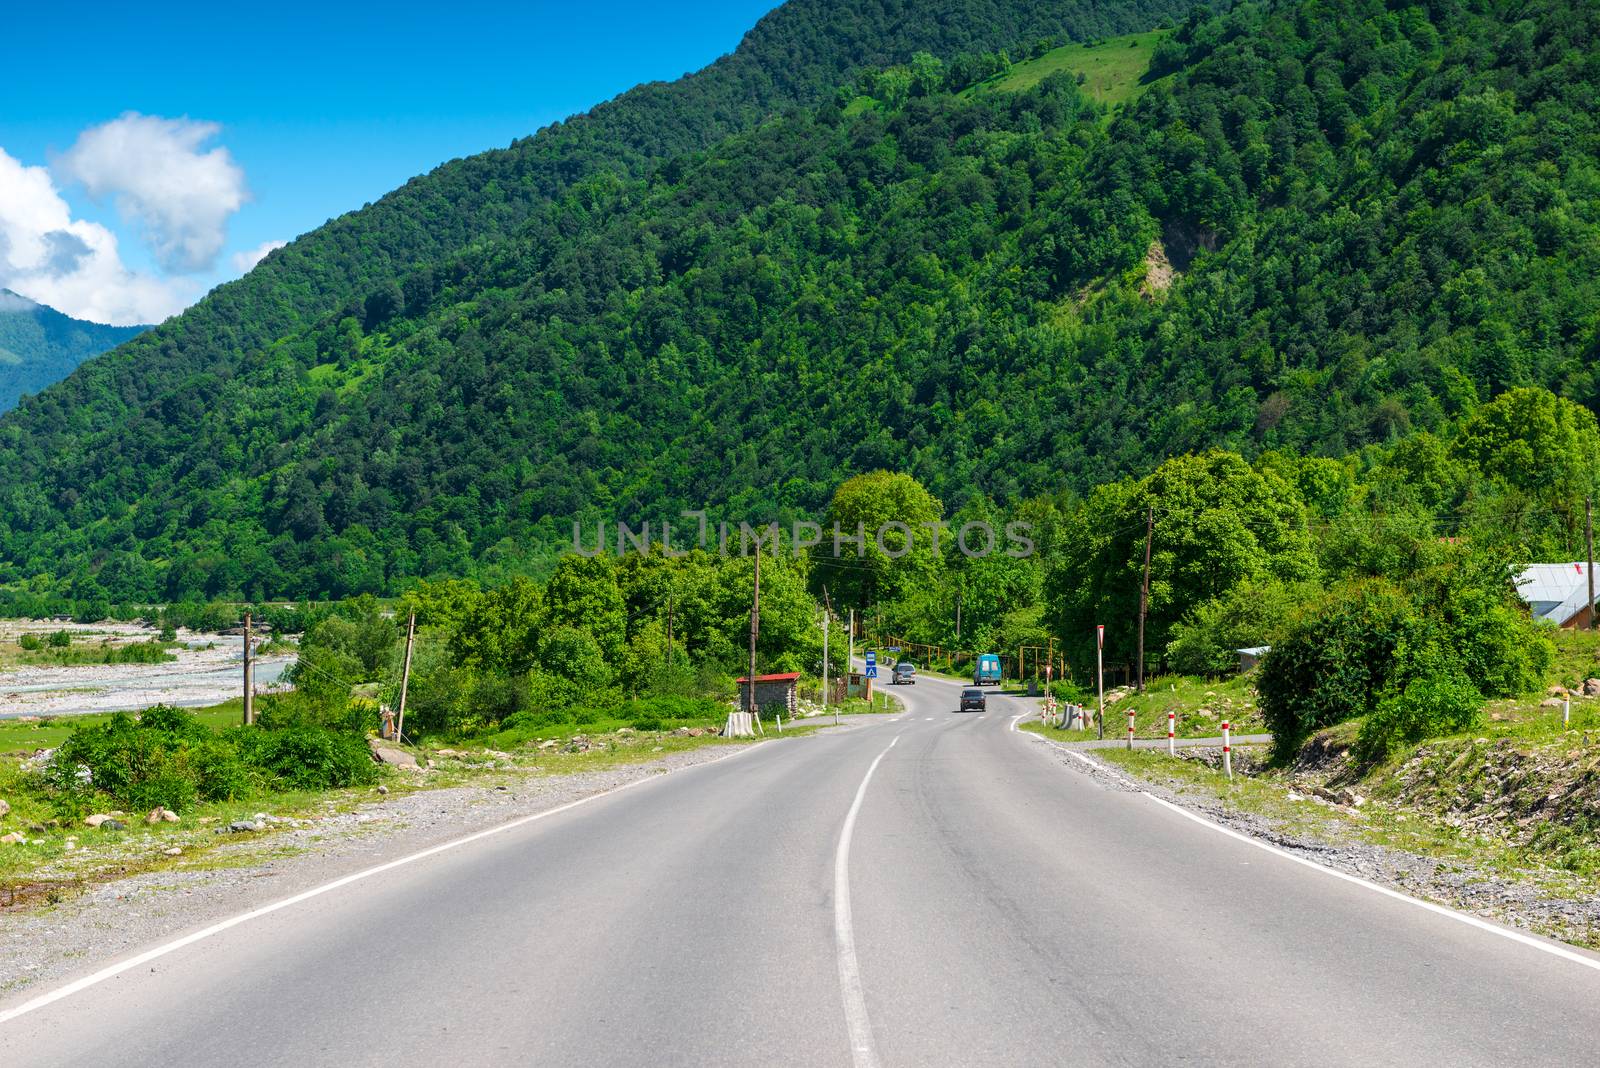 Georgian Military Road in the mountains in Georgia on a sunny da by kosmsos111